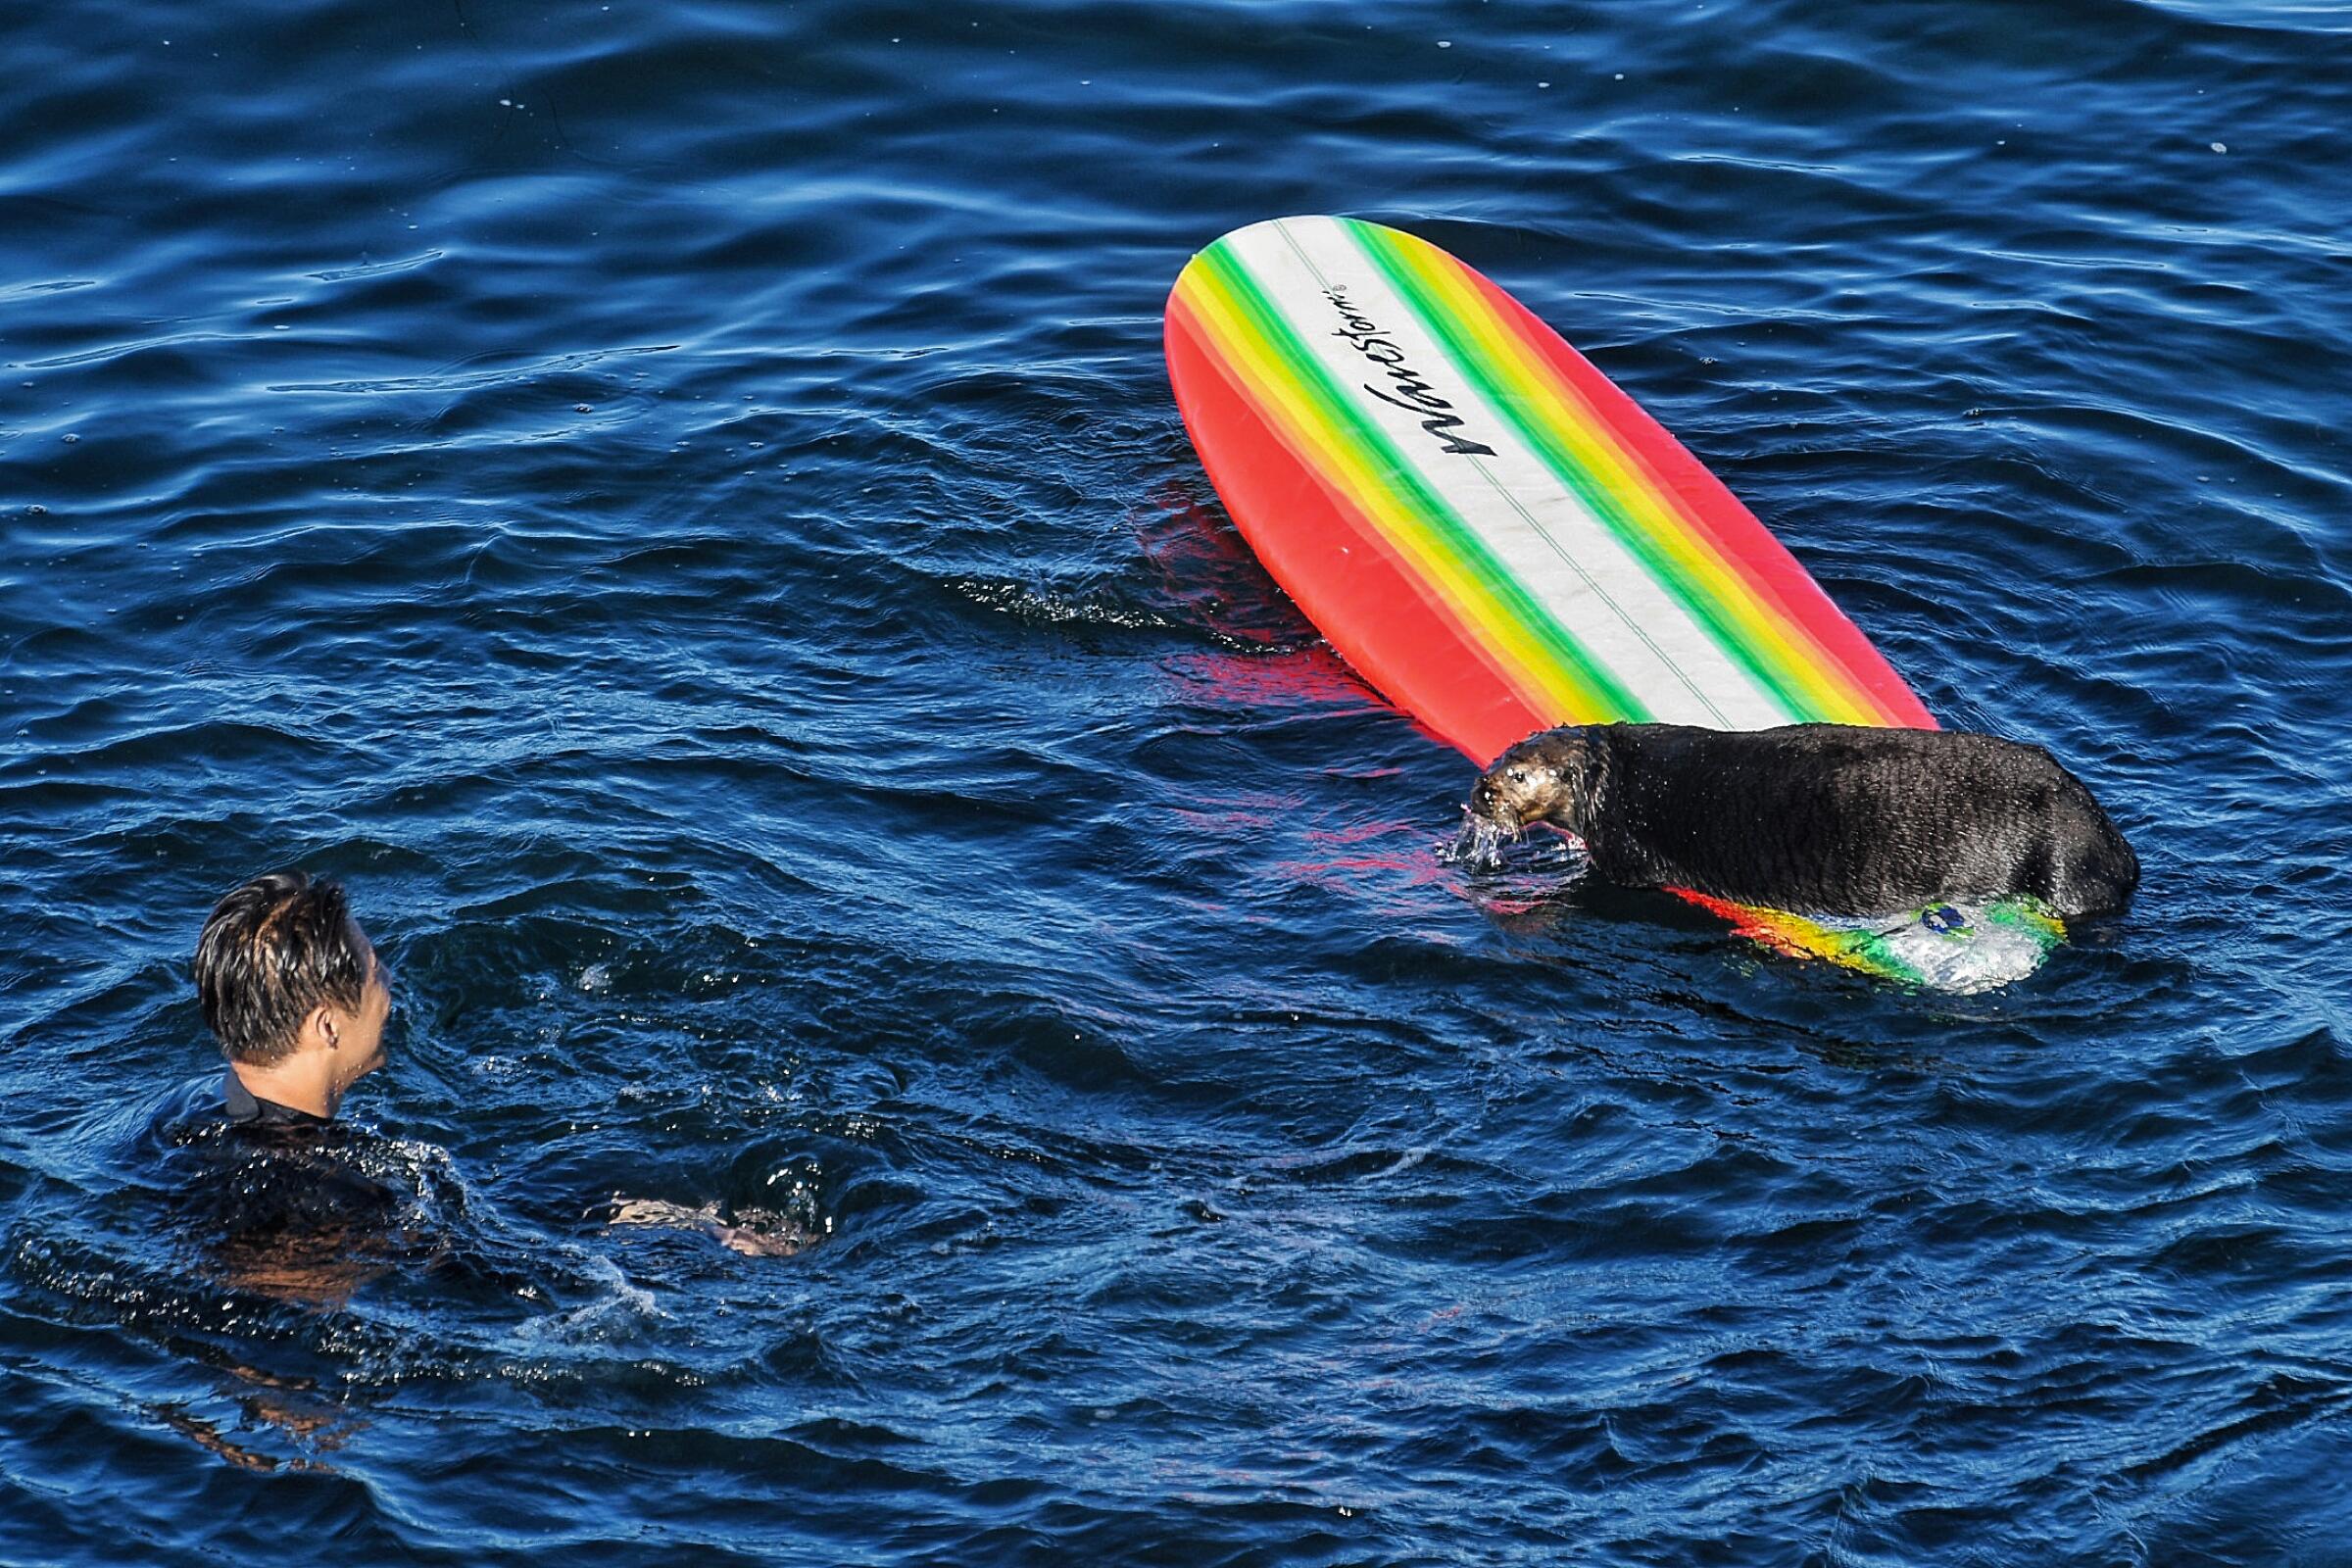 A sea otter on a surfboard looks at a person in the ocean.